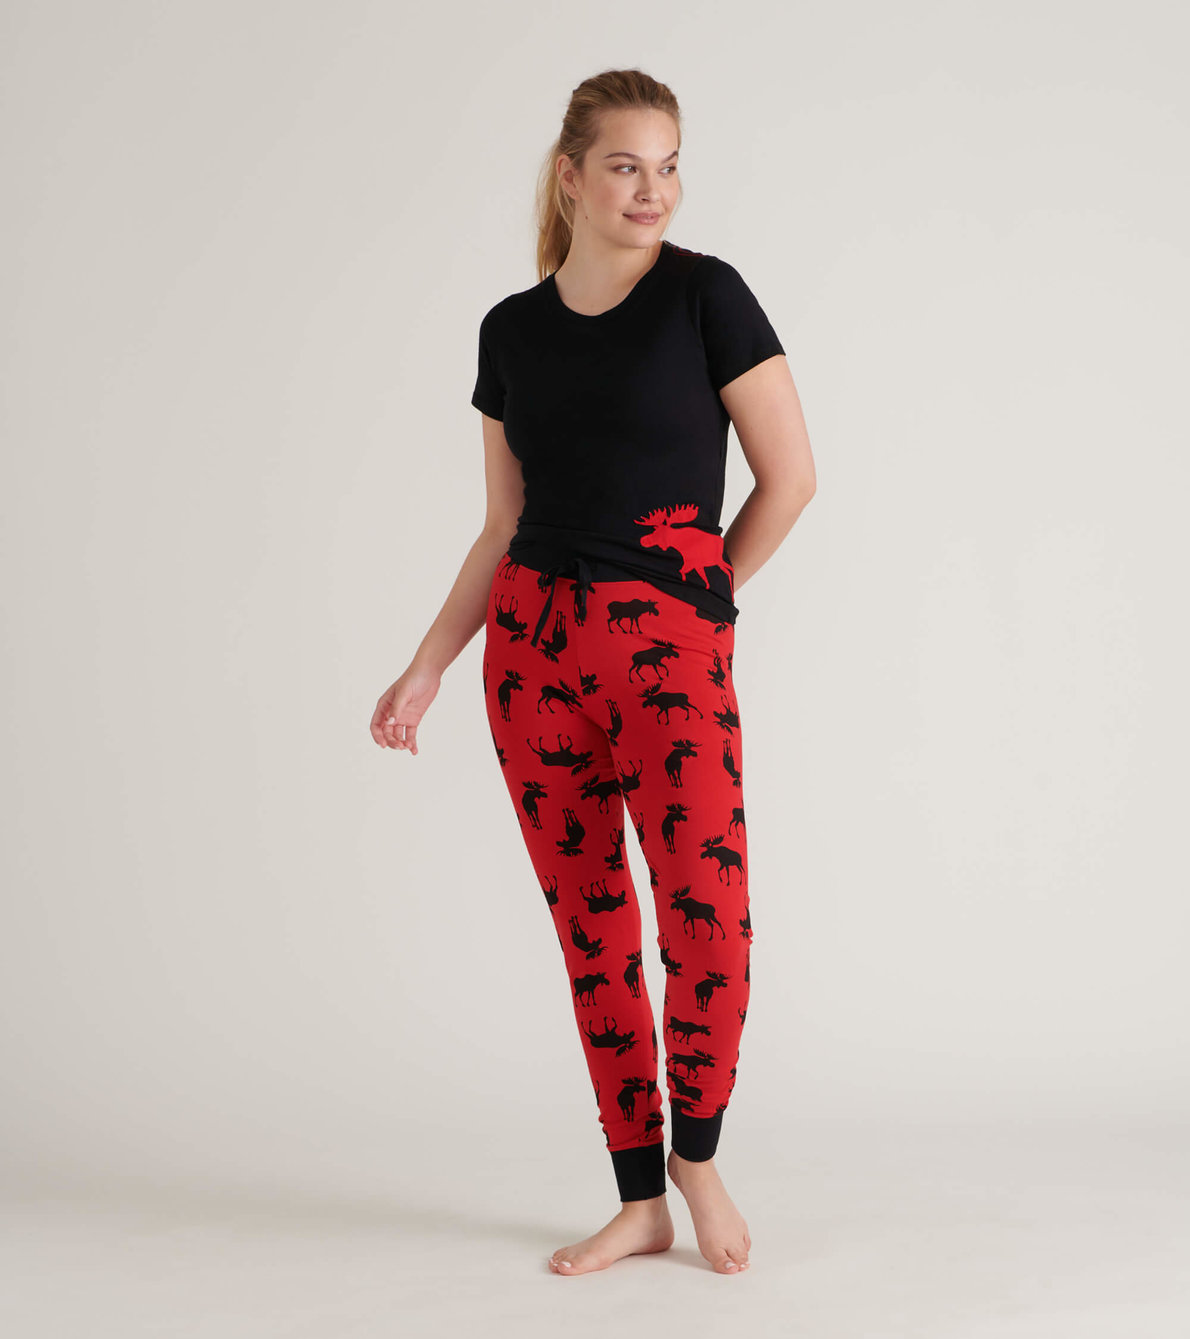 View larger image of Moose on Red Women's Tee and Leggings Pajama Separates